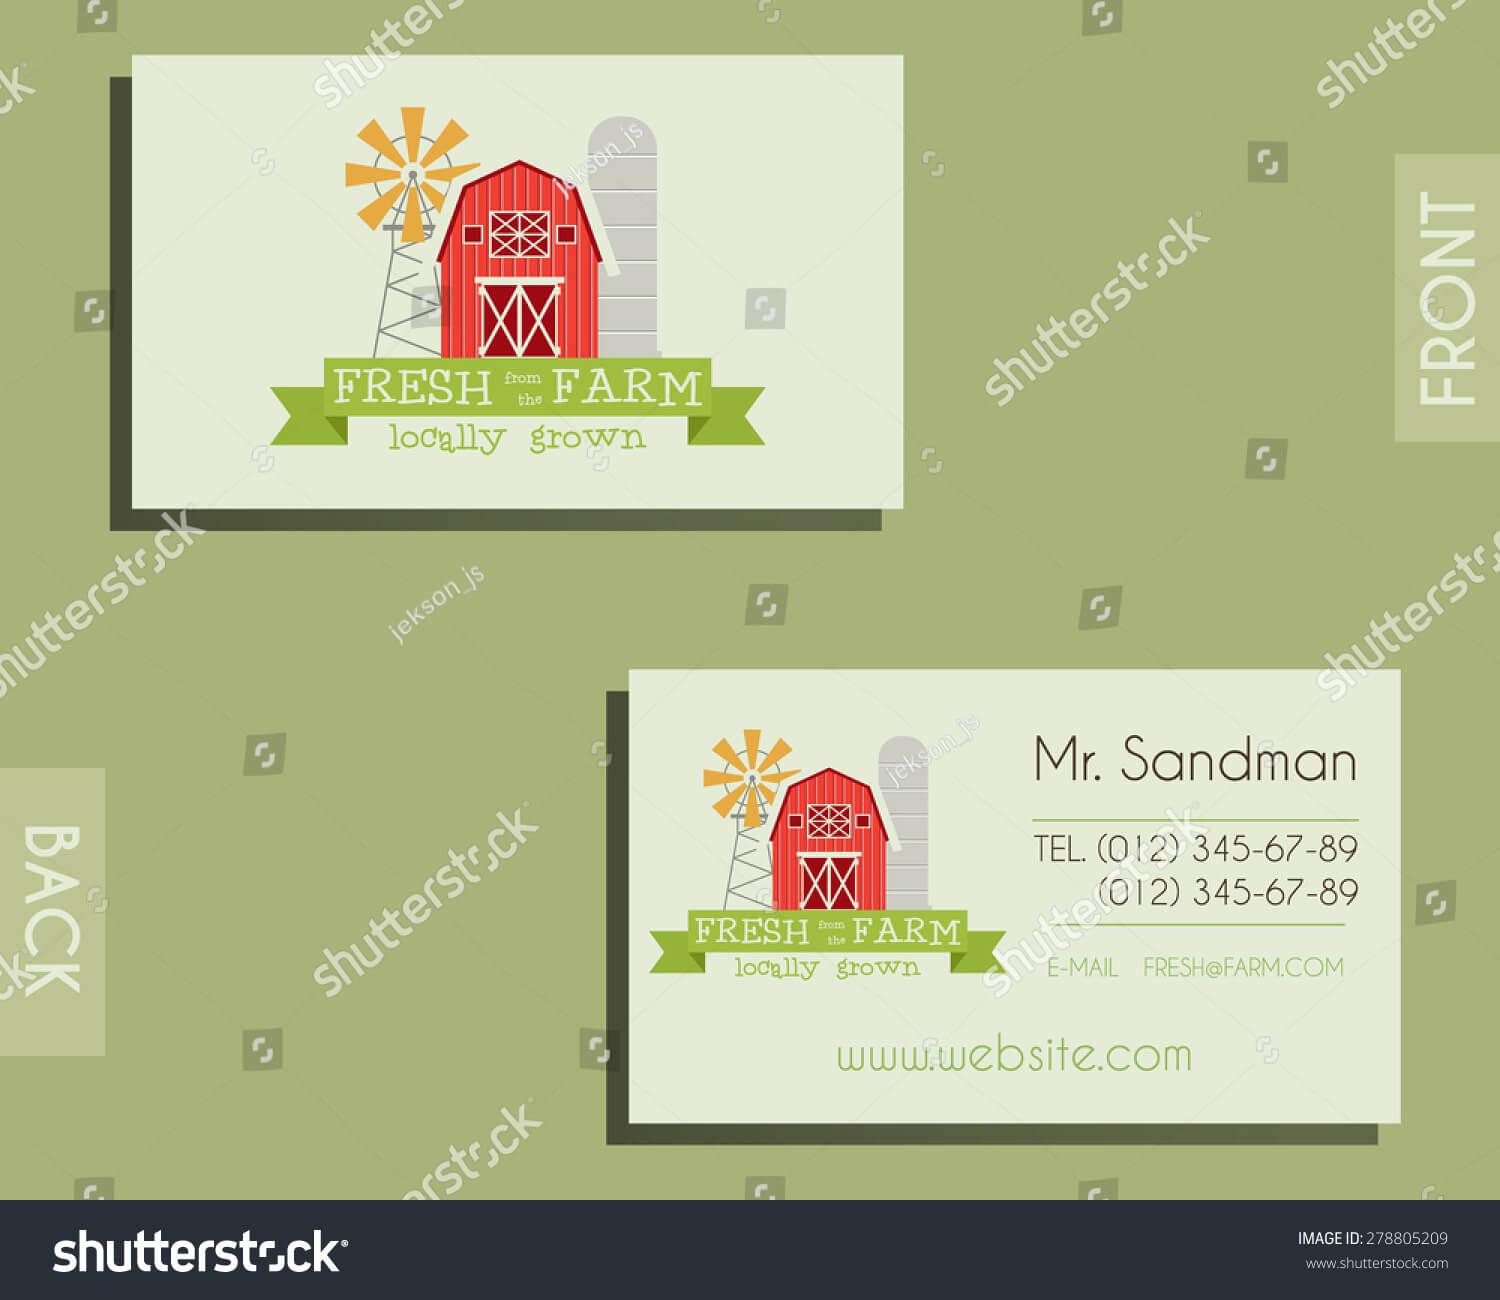 Eco Organic Visiting Card Template Natural Stock Vector Throughout Bio Card Template